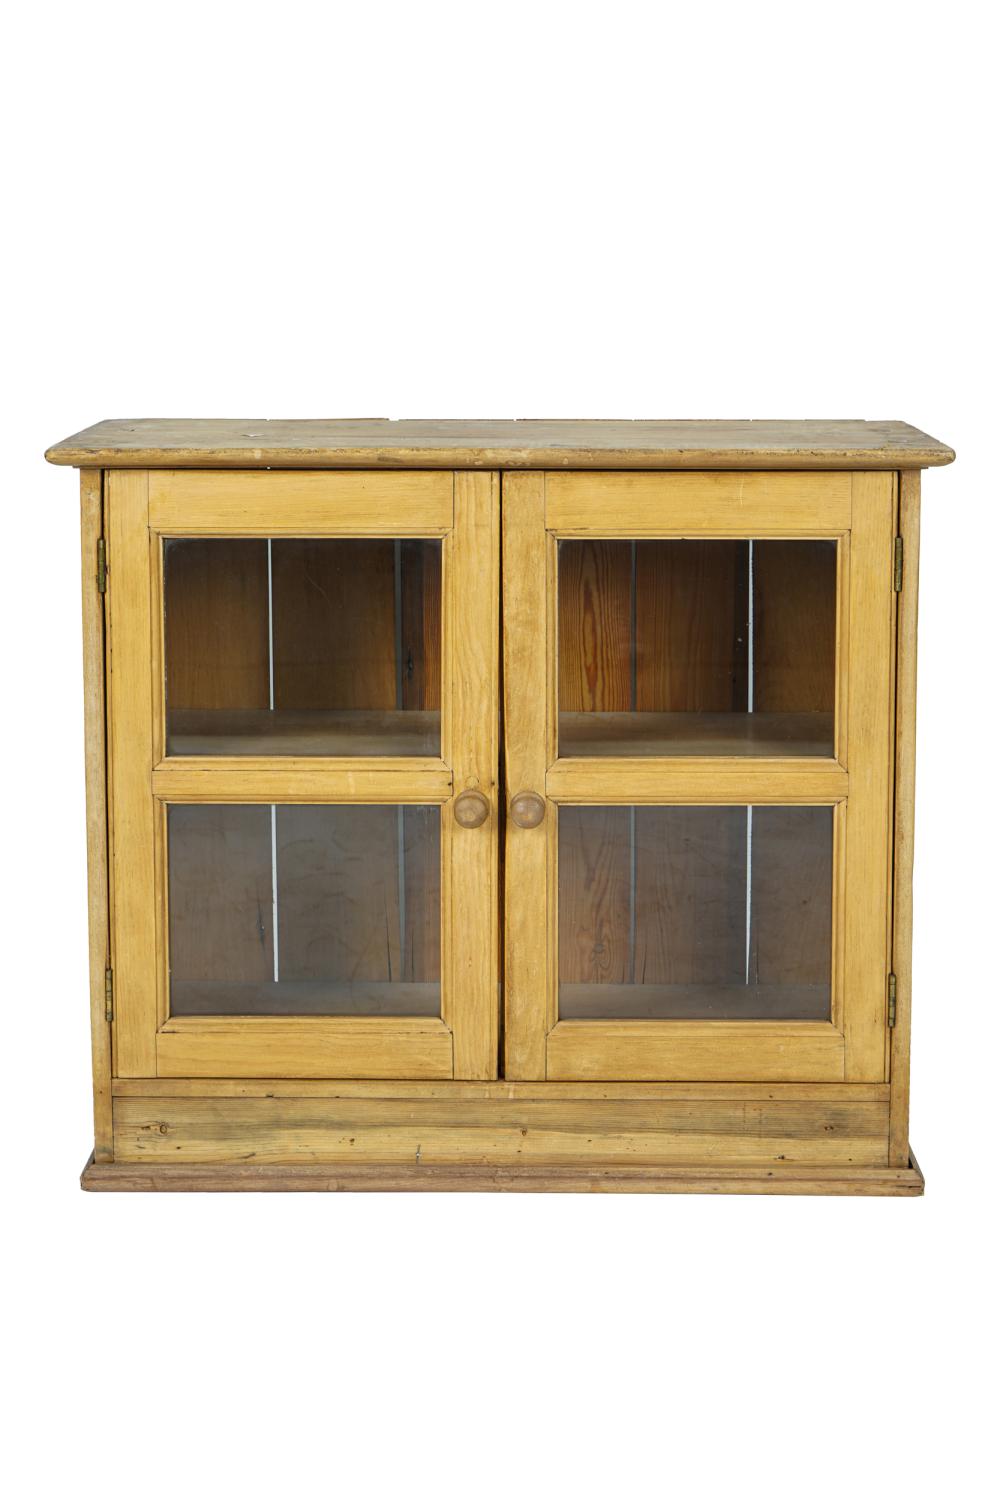 SMALL RUSTIC PINE CABINETwith two